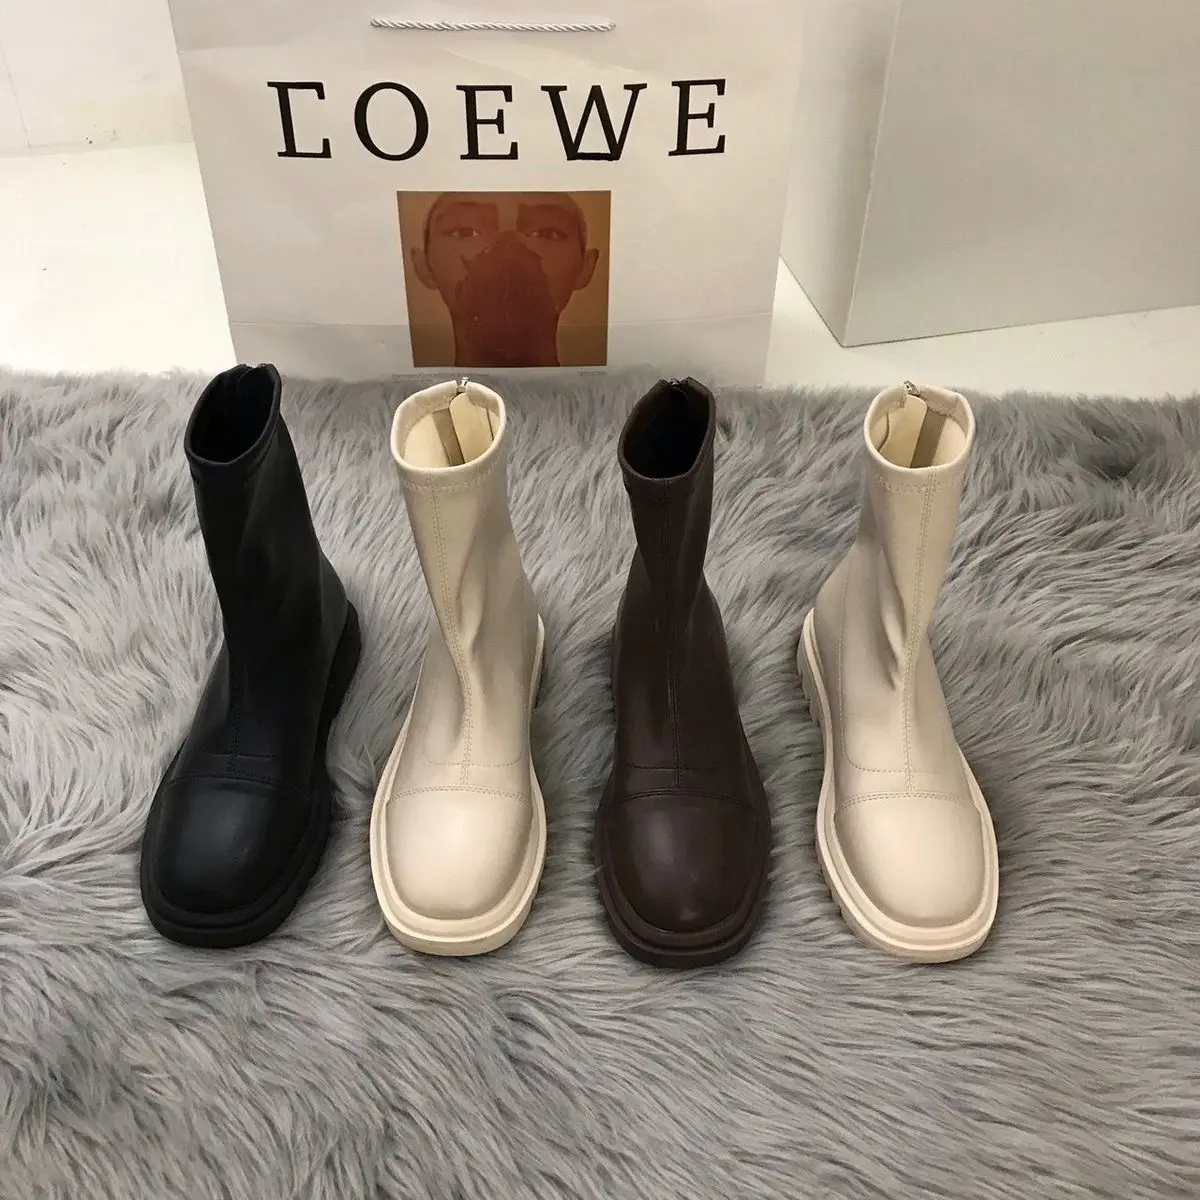 

Mr Co Women Block Low Heels Ankle Boots Spring Female Round Toe Back Zipper Chelsea Boots High Quality Short Boots Black Beige